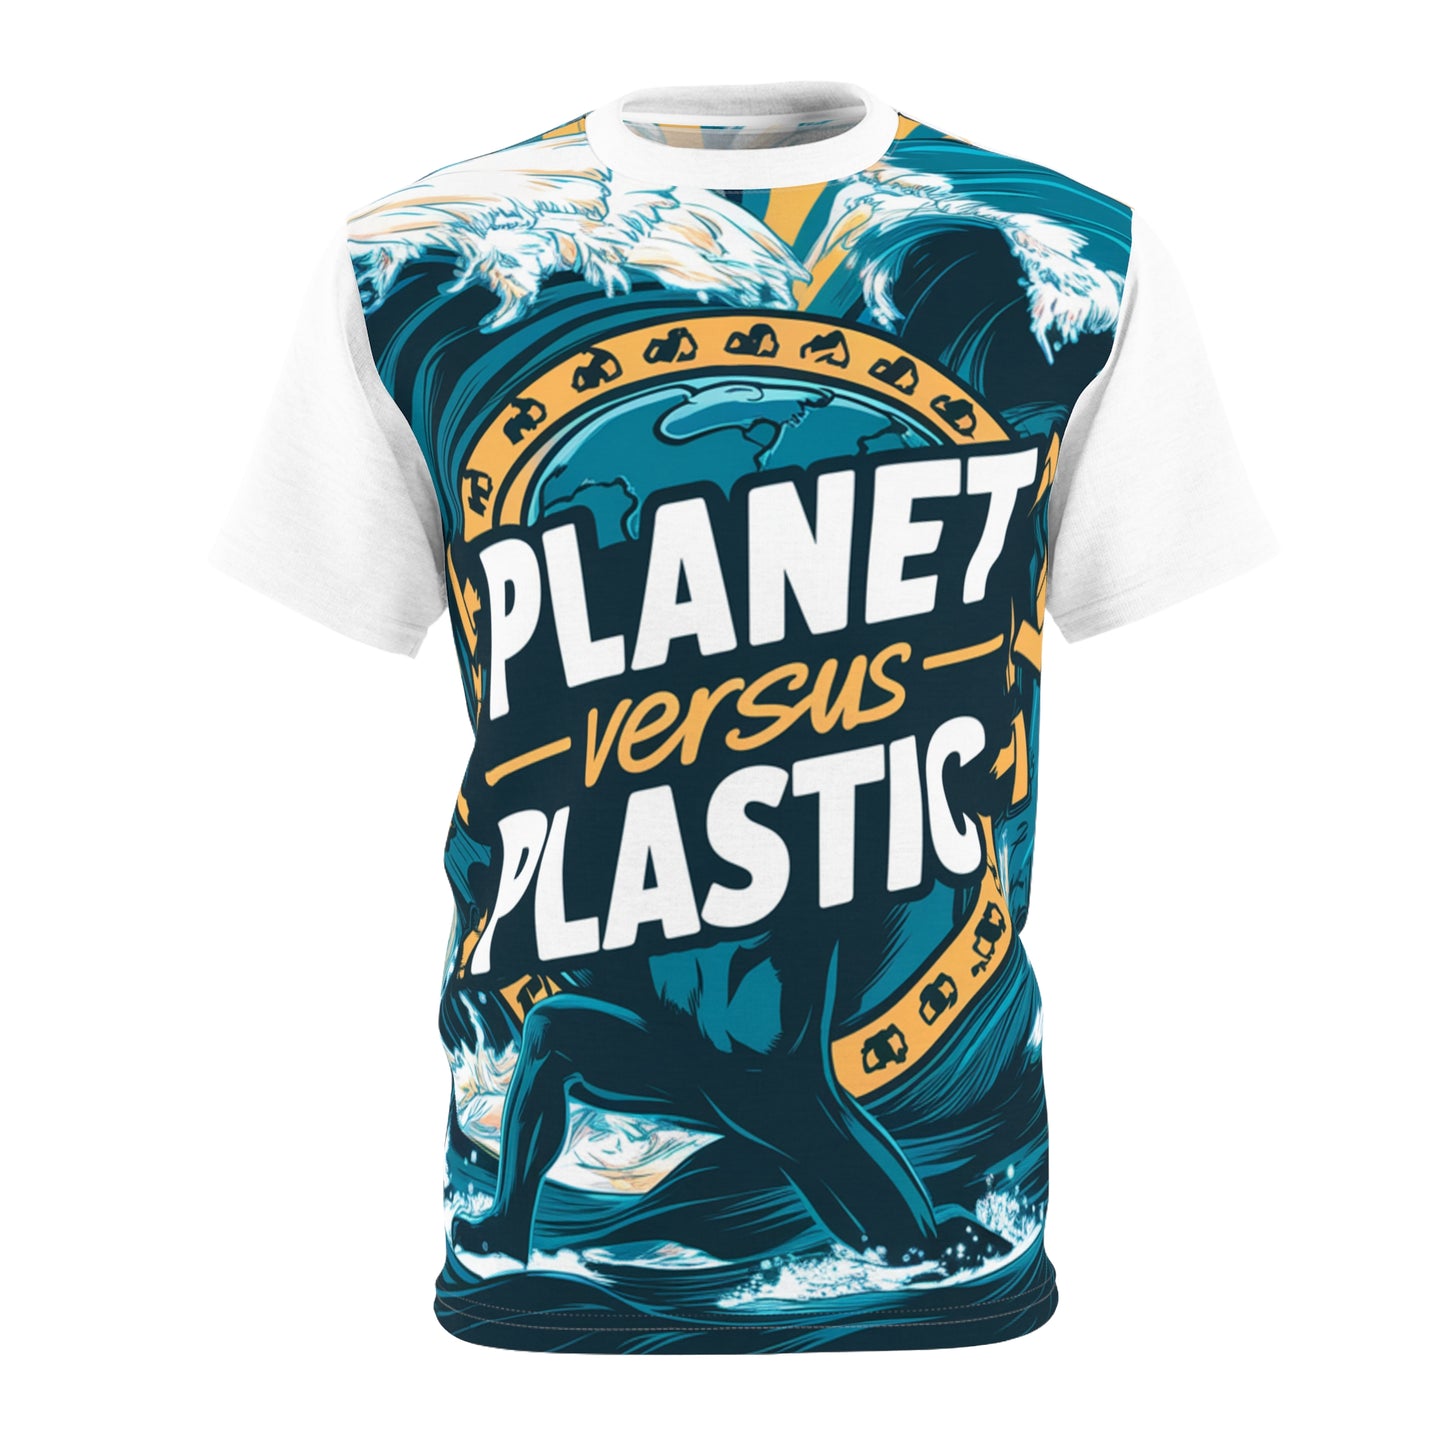 PoM's special edition "Planet versus Plastic" (Model E, Intern. Earth Day 2024) ... Unisex Cut & Sew Tee (AOP - All Over Print)